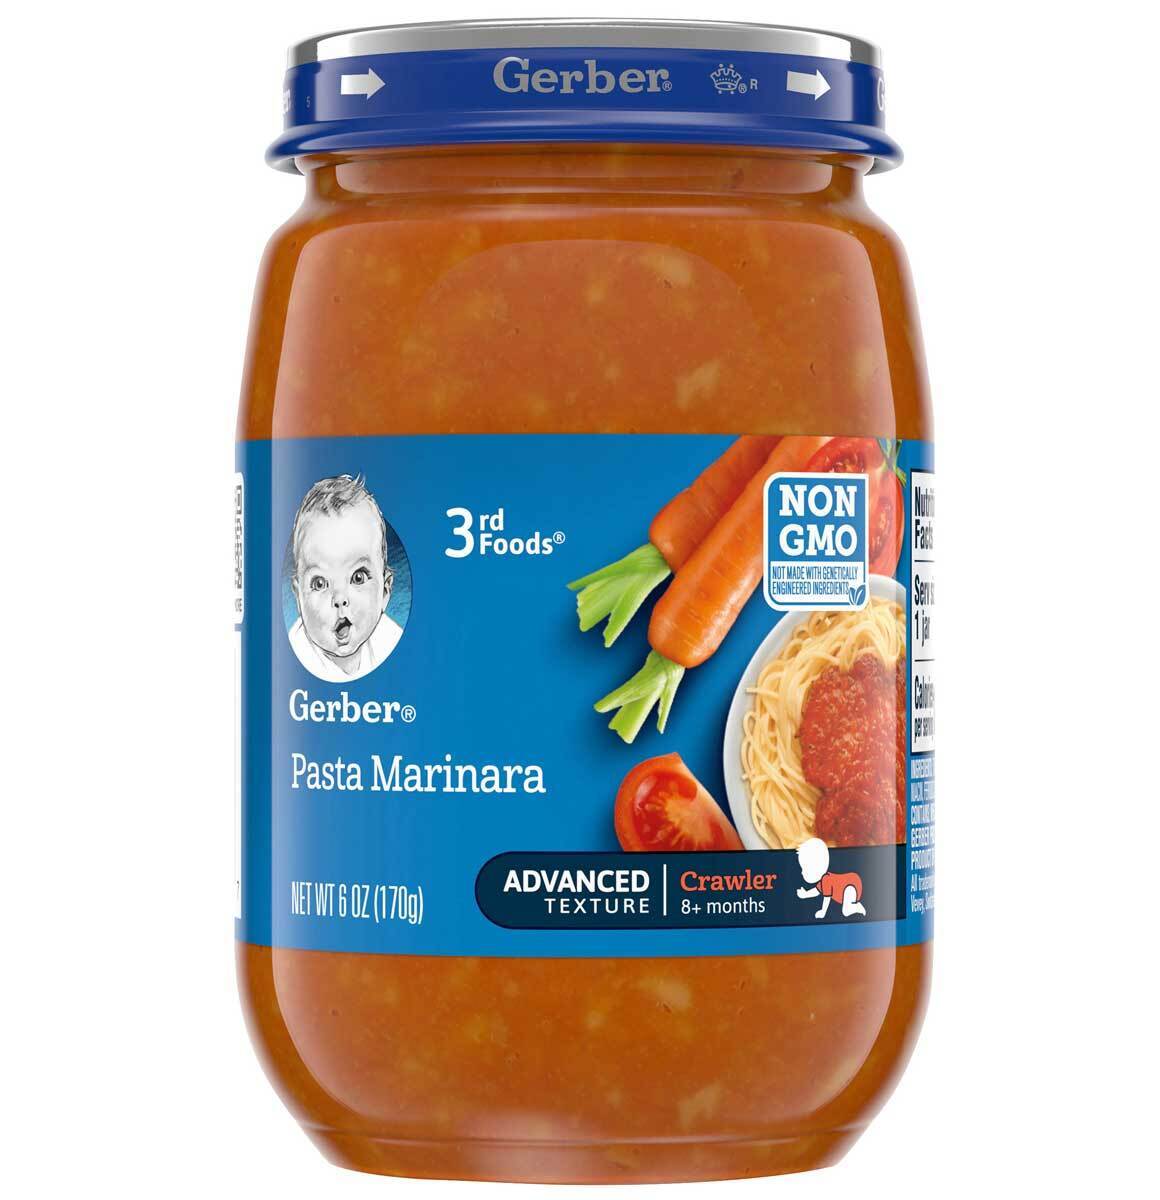 Gerber 3rd Foods Baby Food Pasta Marinara Non GMO 8+ Months – 6 Oz – Pack of 12 Gerber Does not apply